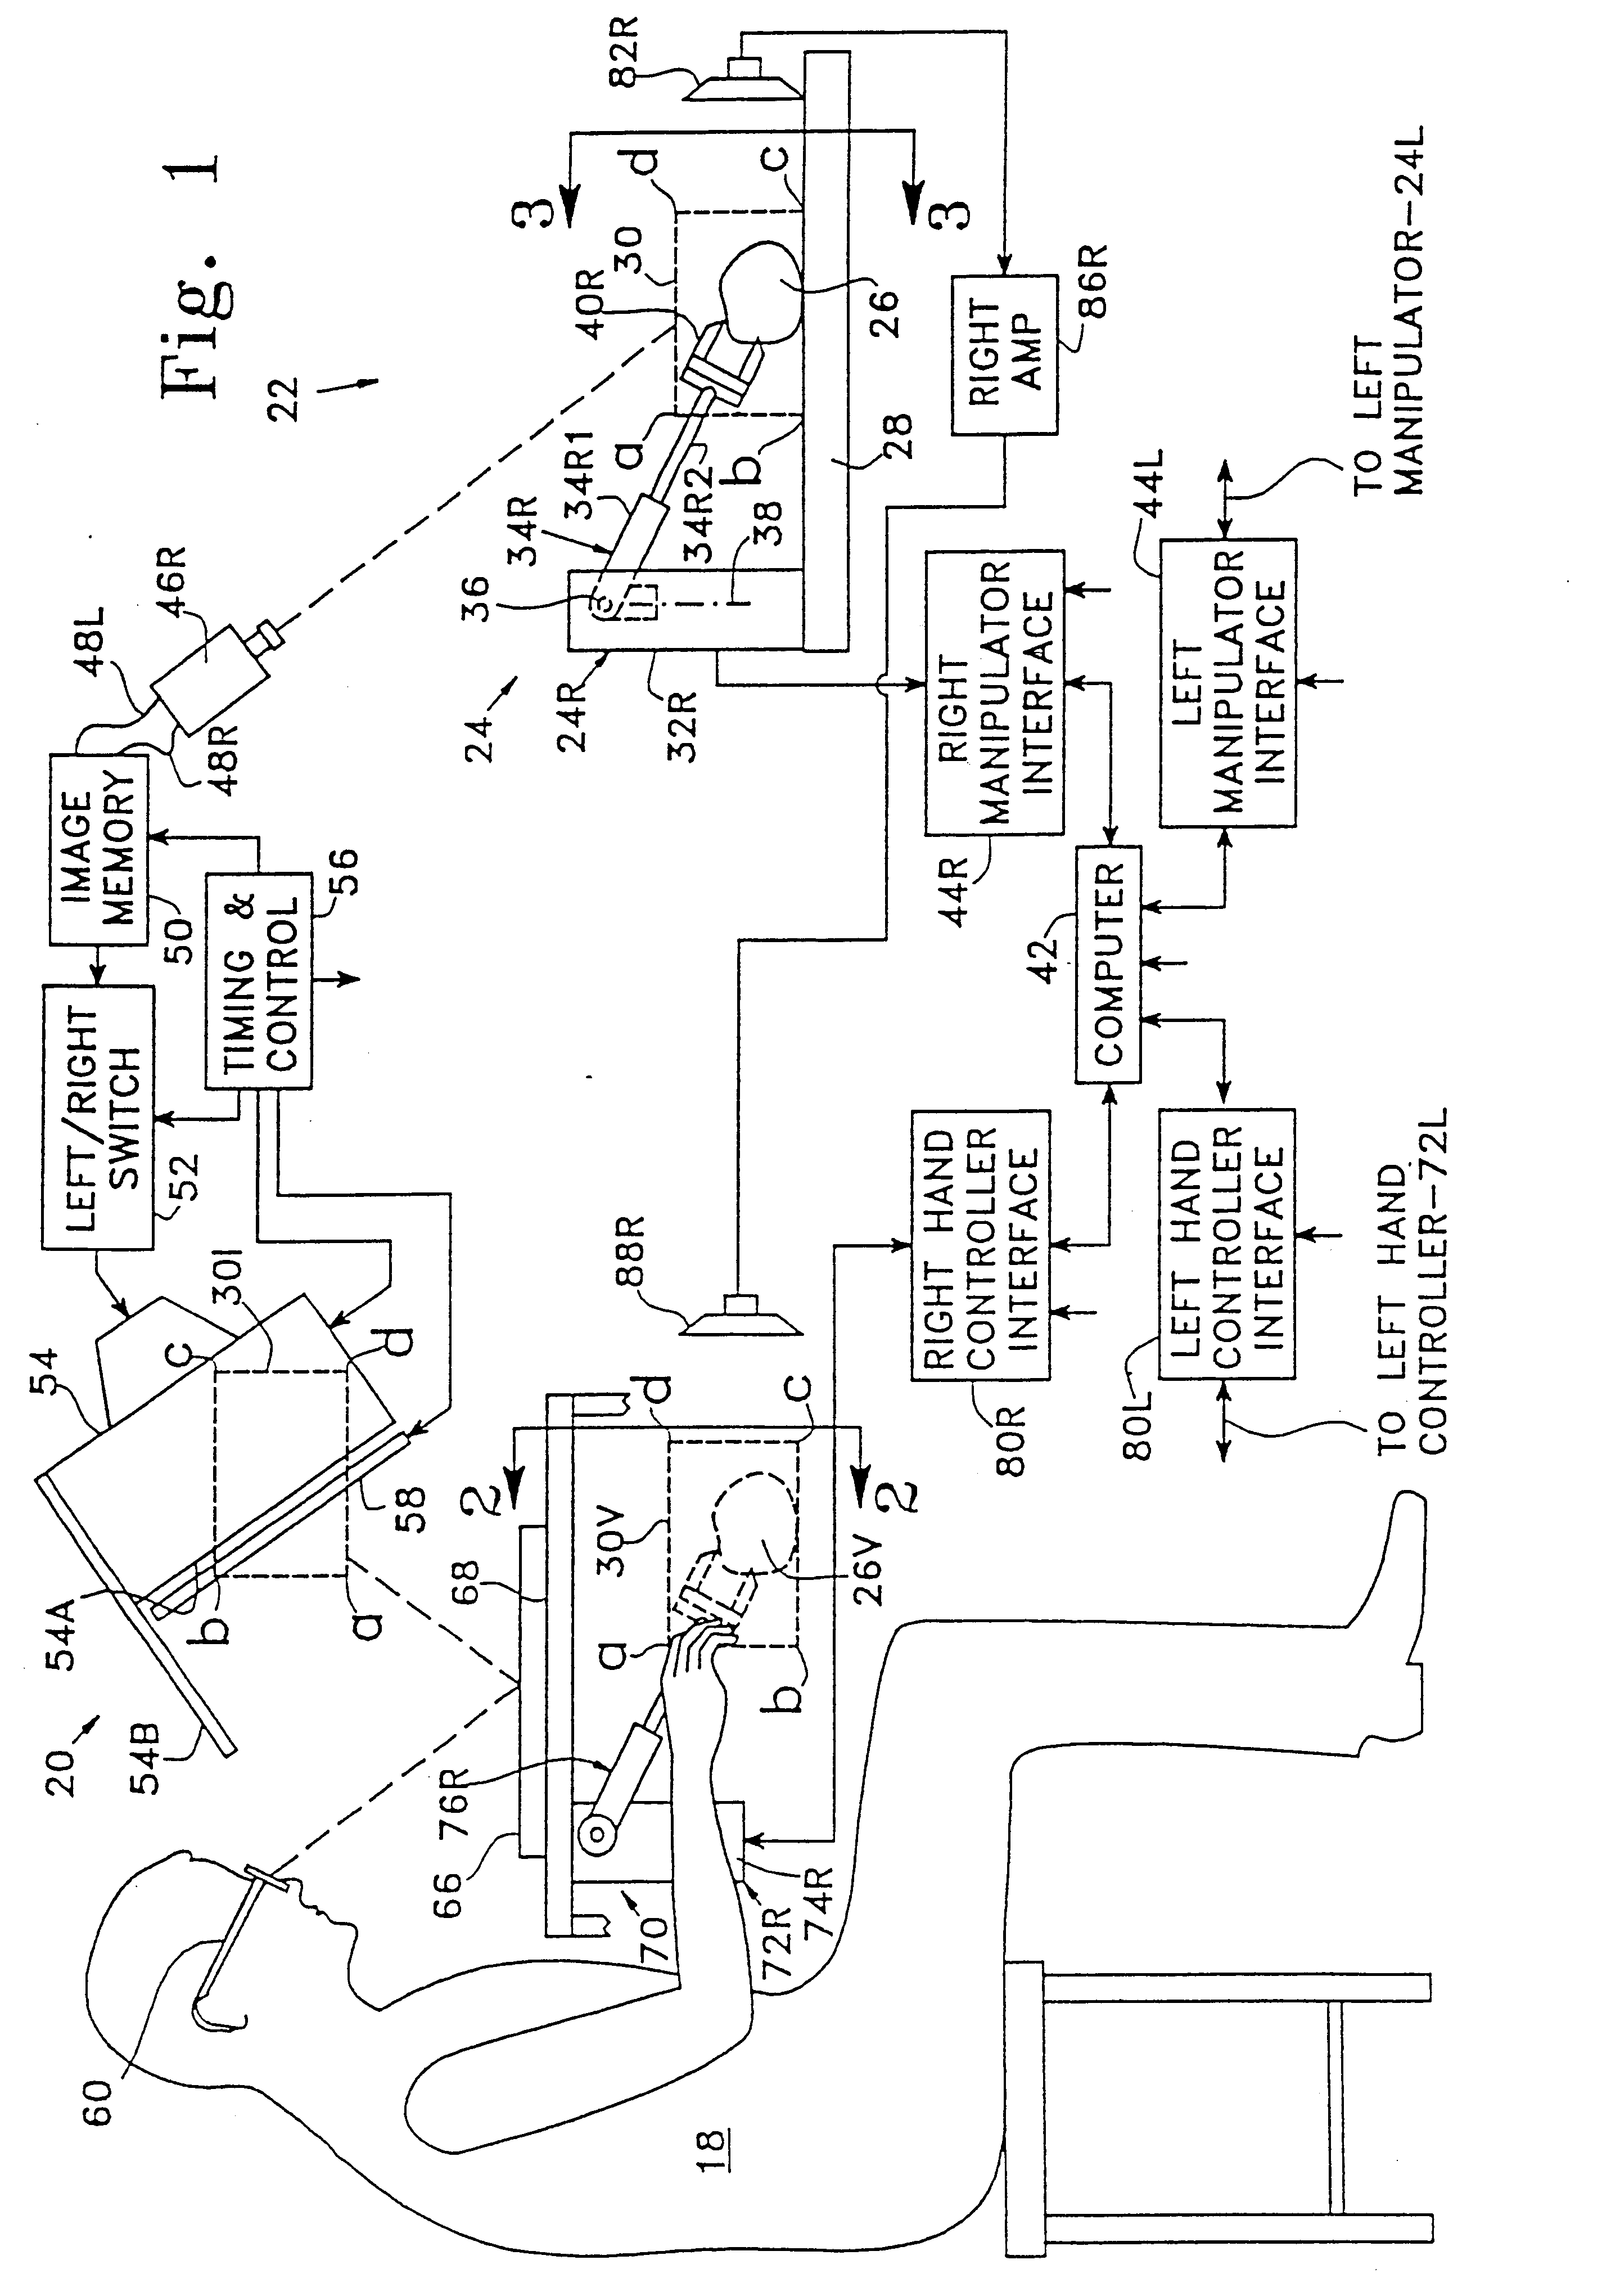 System and method for remote endoscopic surgery